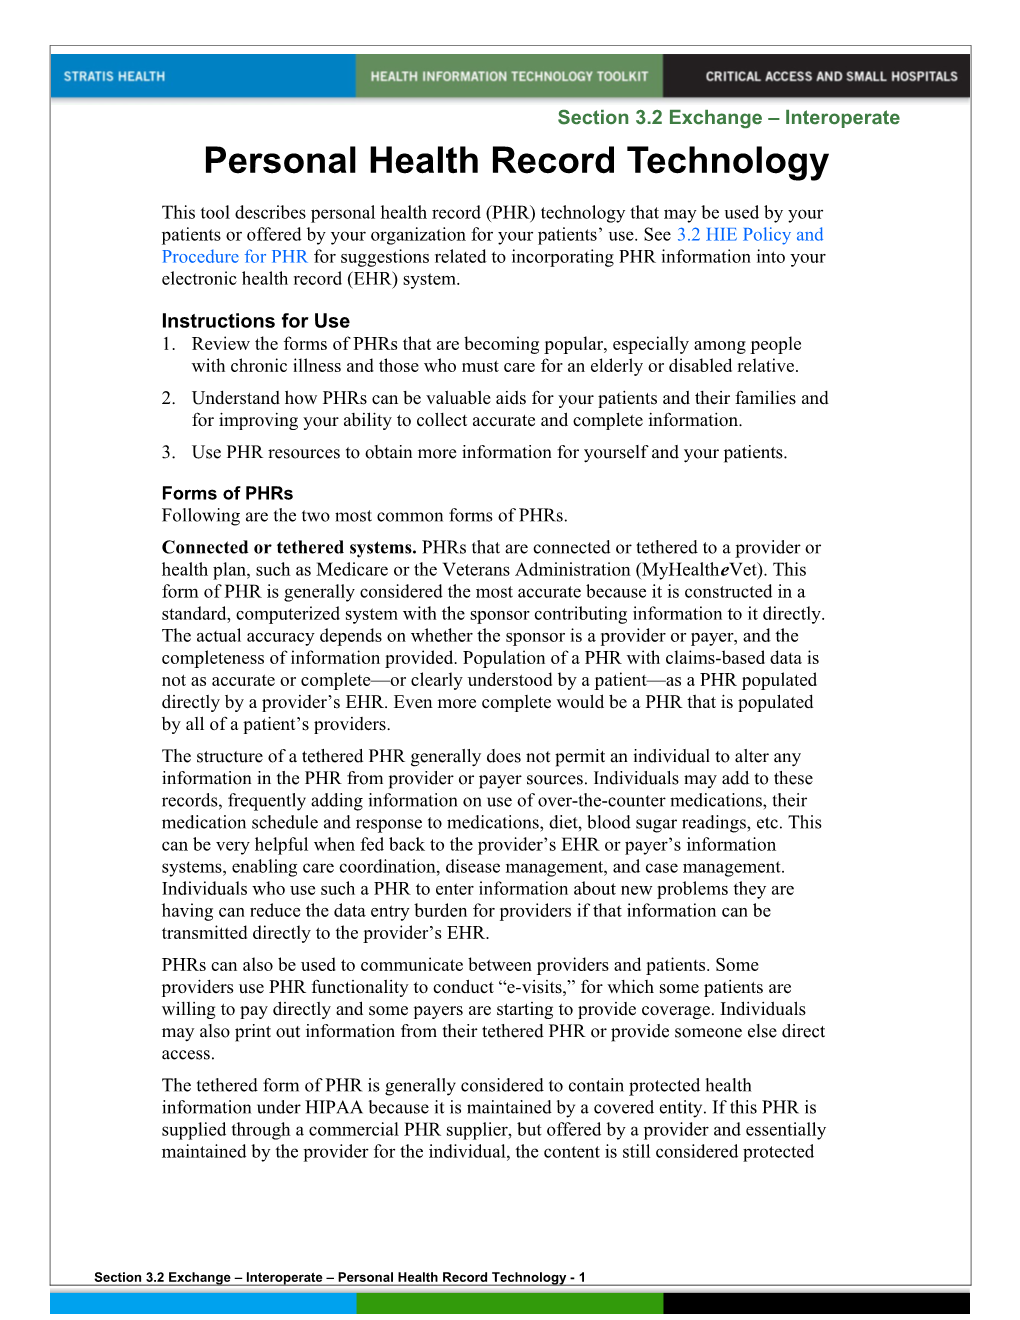 Personal Health Record Technology